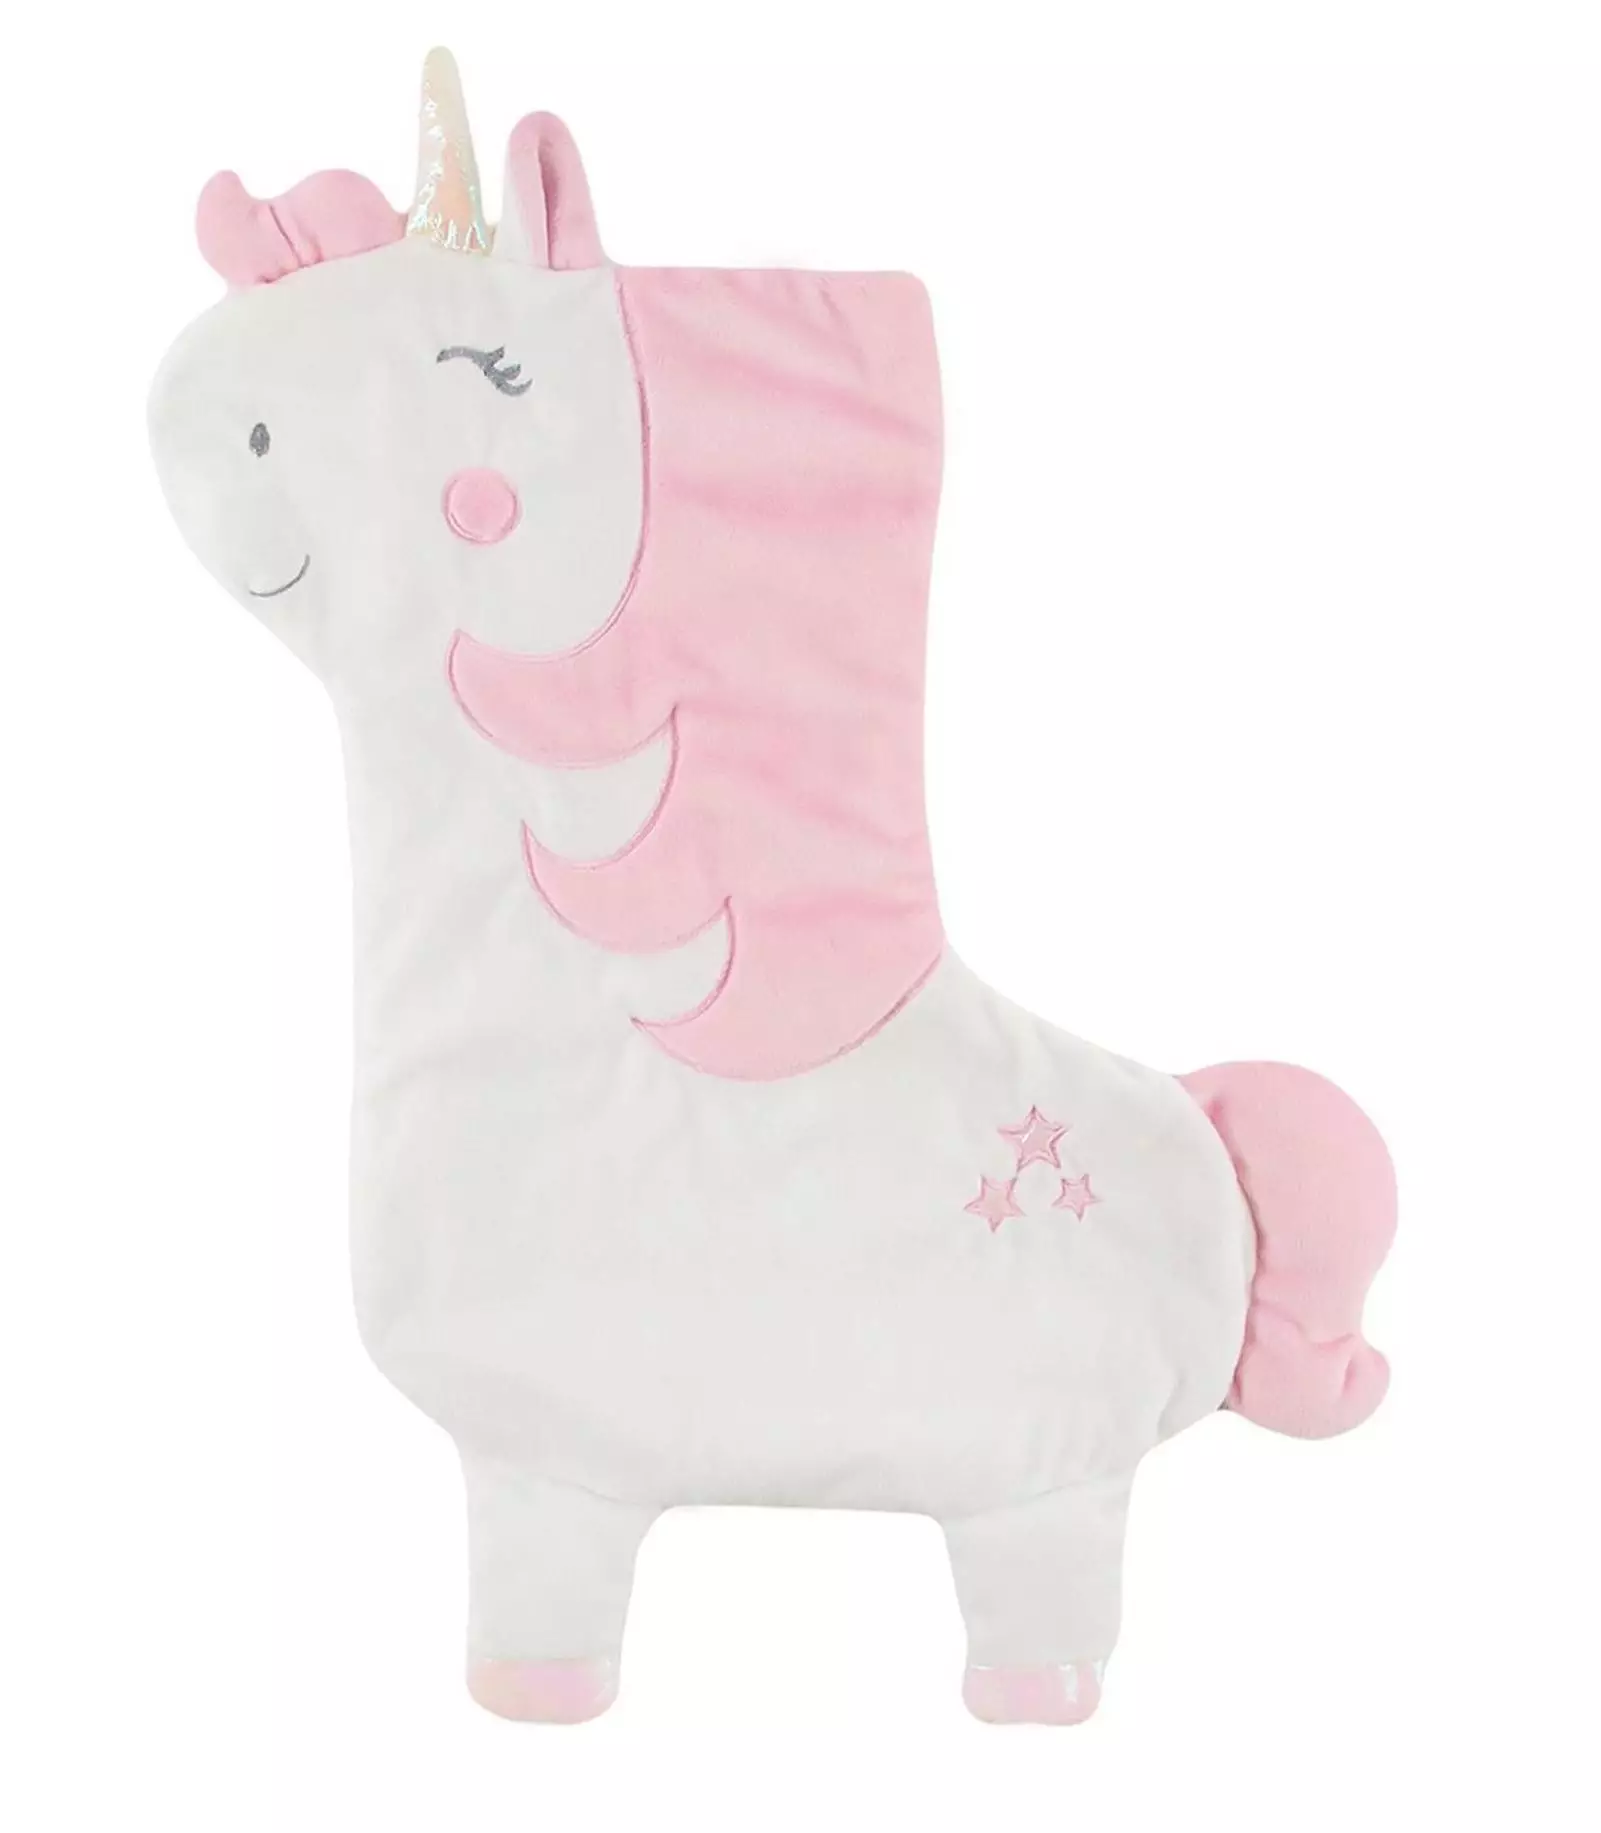 The unicorn stocking is another option for lovers of the mythical creatures. (